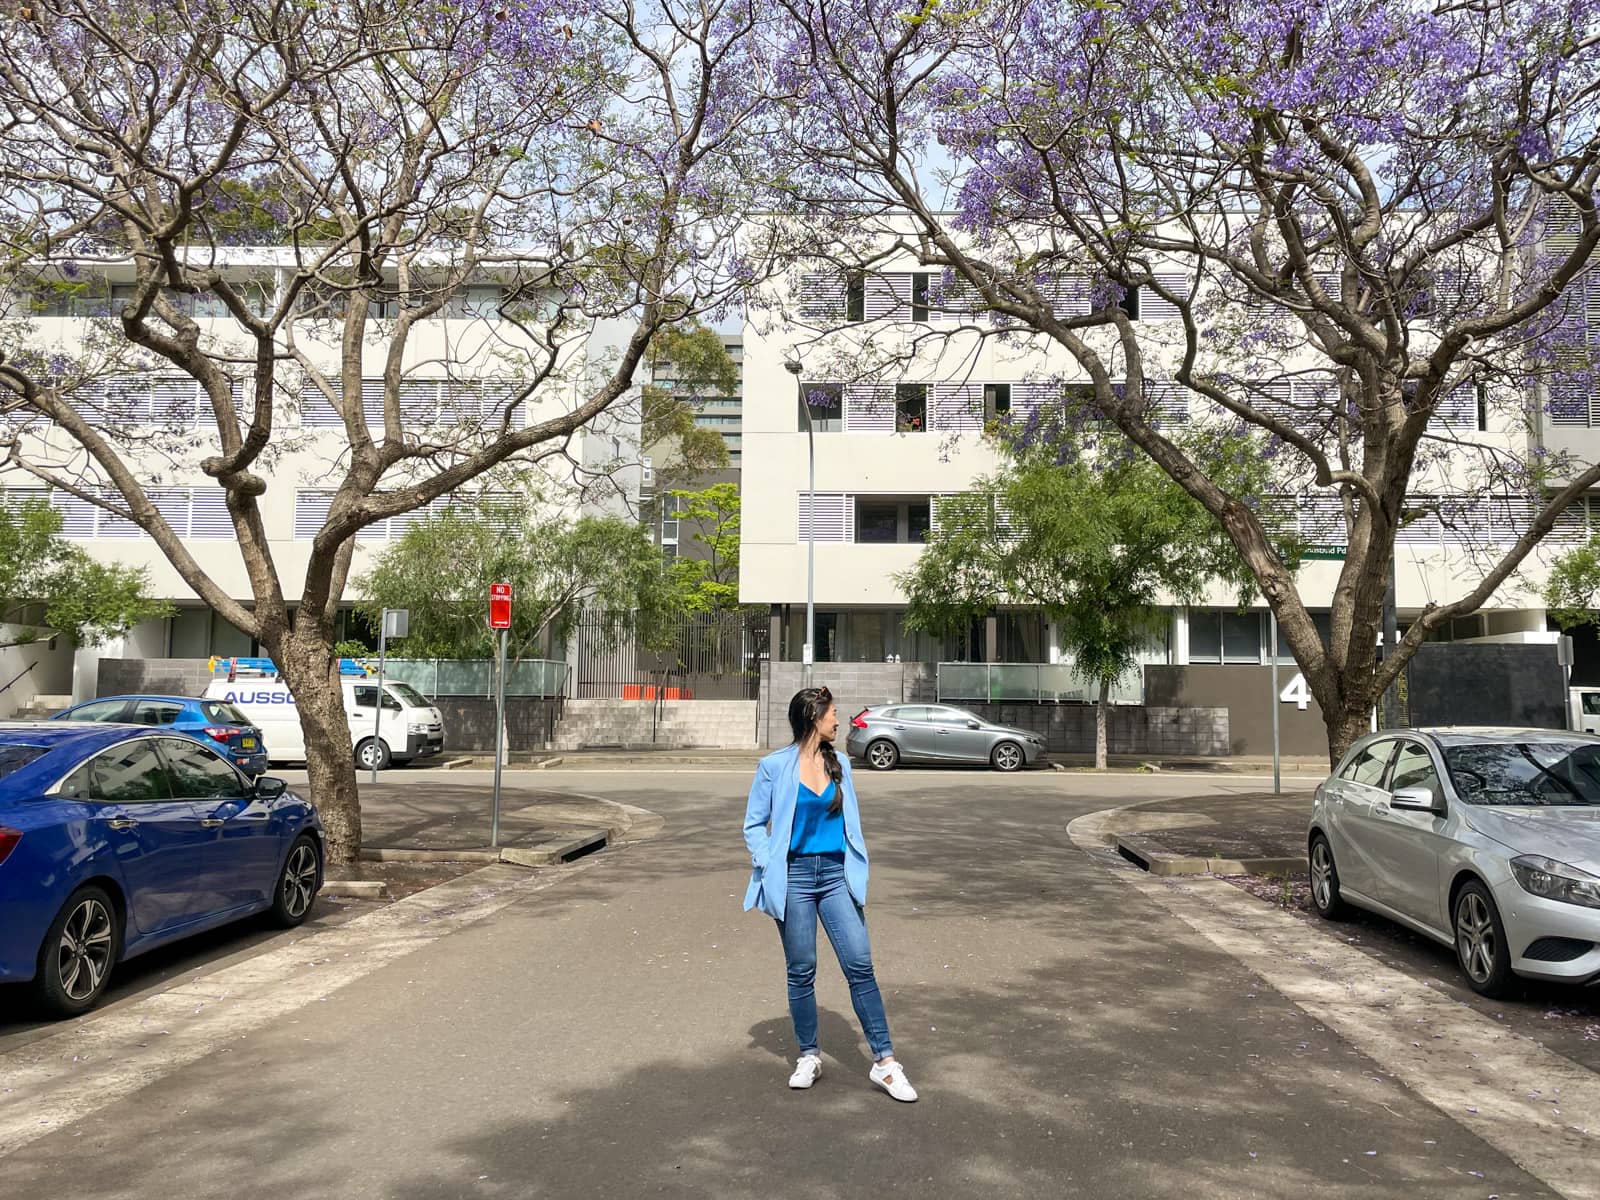 A woman with fair skin and long dark hair braided loosely in a side braid, standing in the middle of a quiet street. She is wearing a light blue blazer and blue jeans with white sneakers. She is looking over her shoulder and above her there is a canopy of jacaranda trees